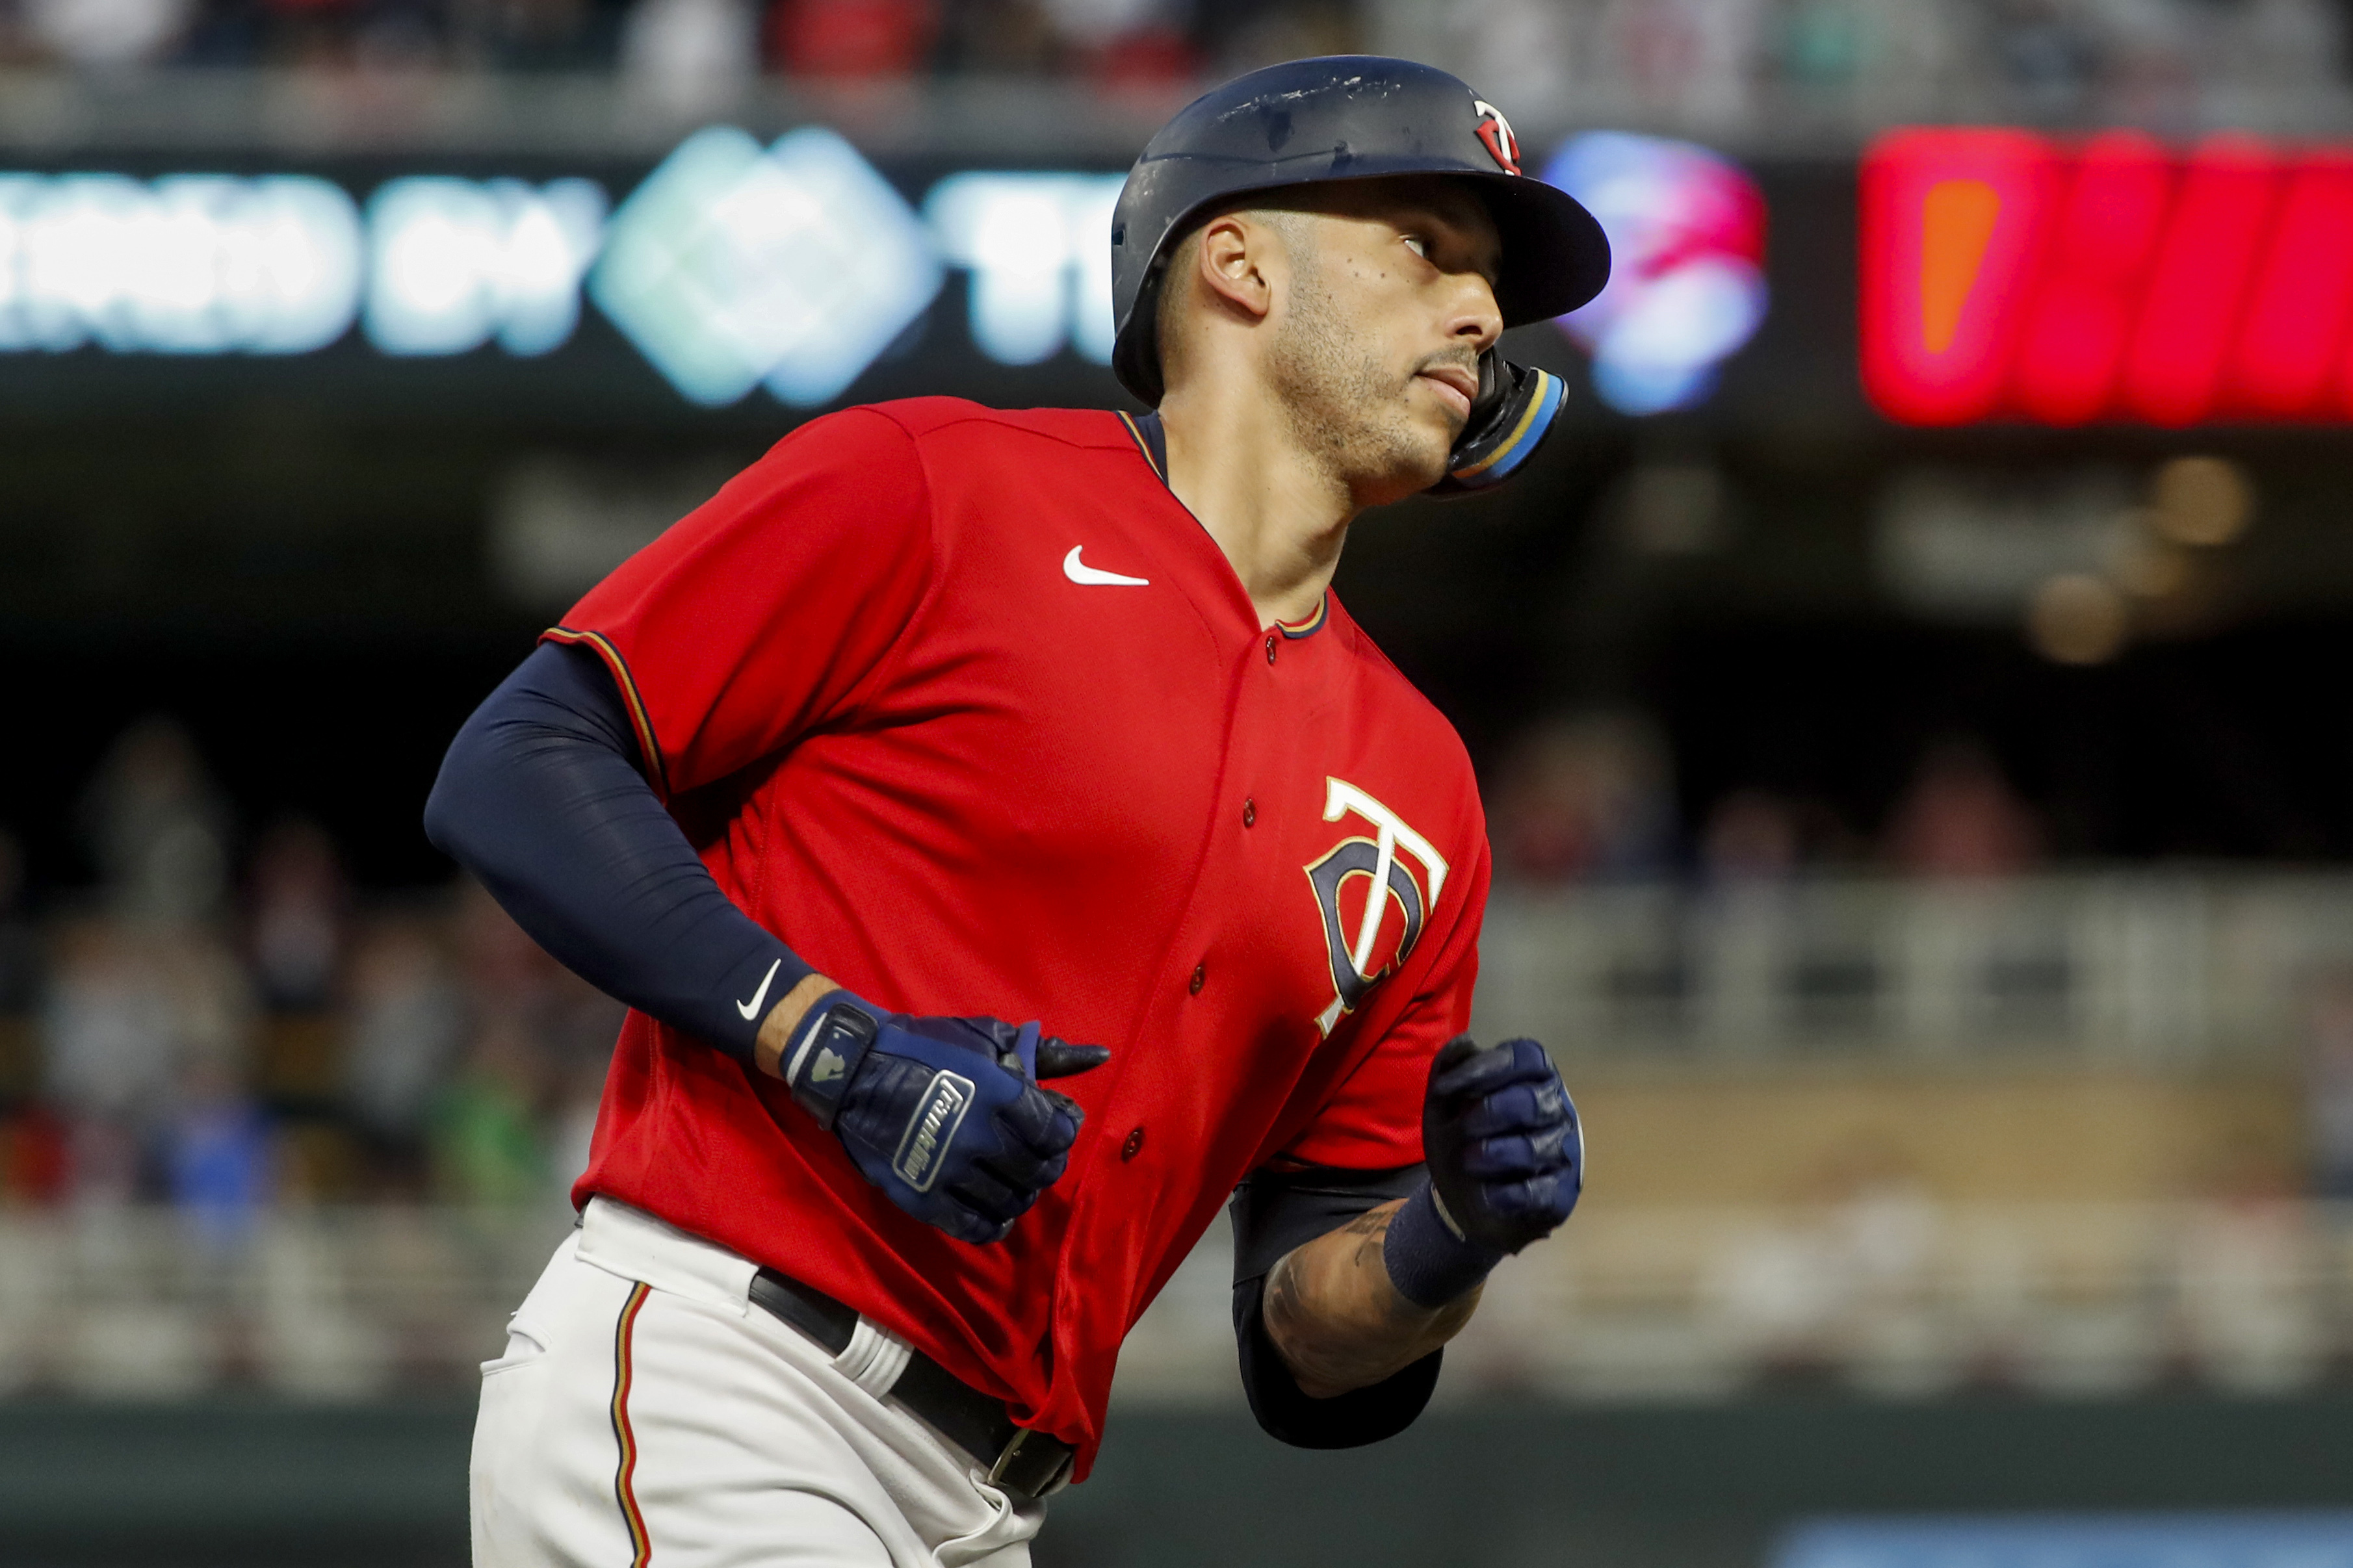 Carlos Correa placed on injured list, to miss Twins-Astros series